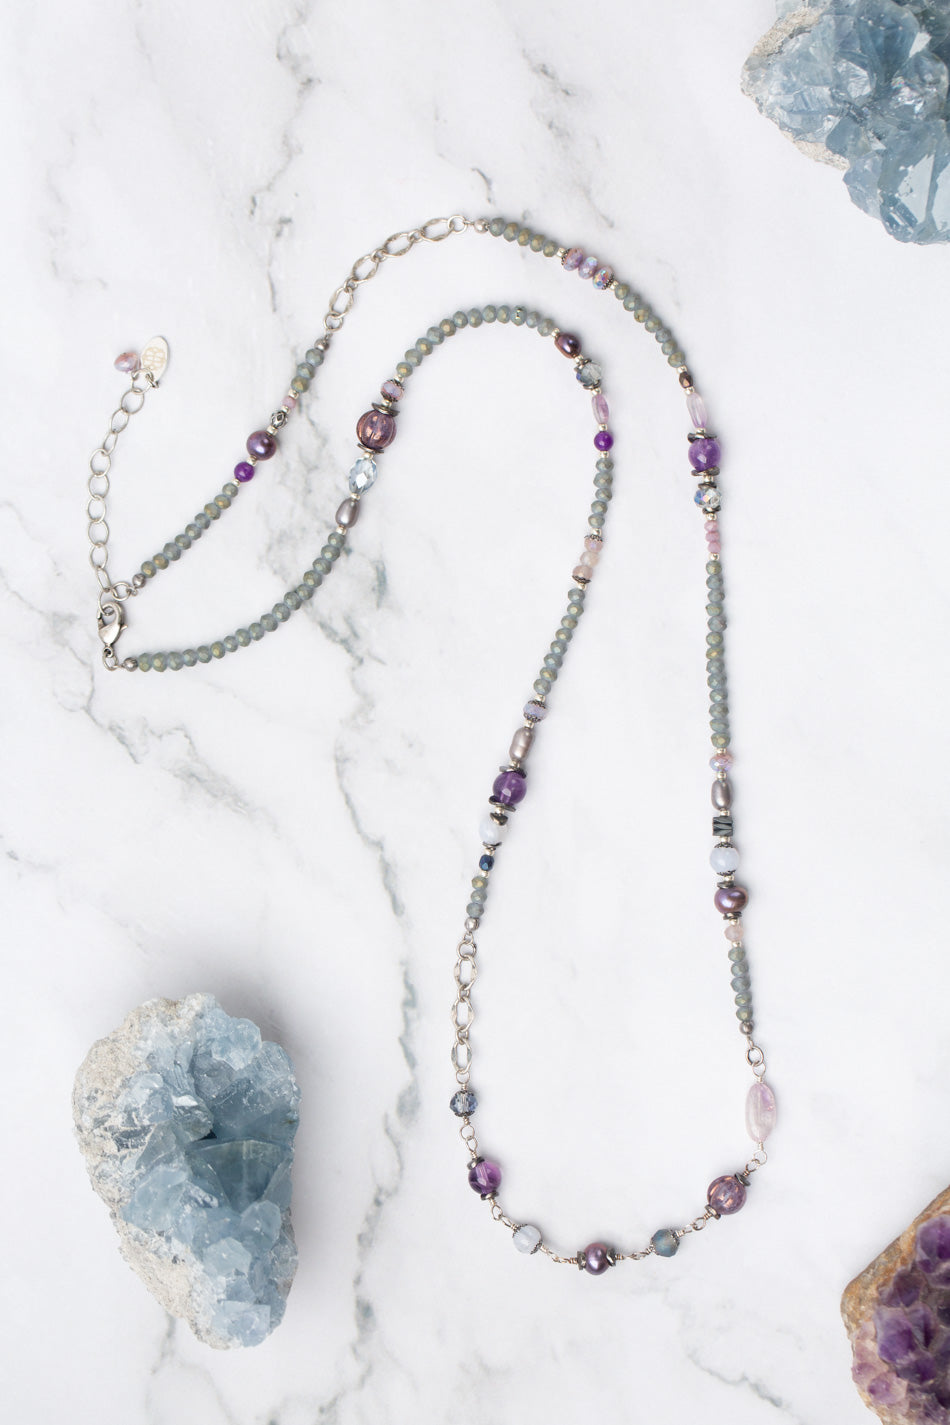 Reflections 29.5-31.5" Amethyst, Pearl, Blue Lace Agate Collage Necklace